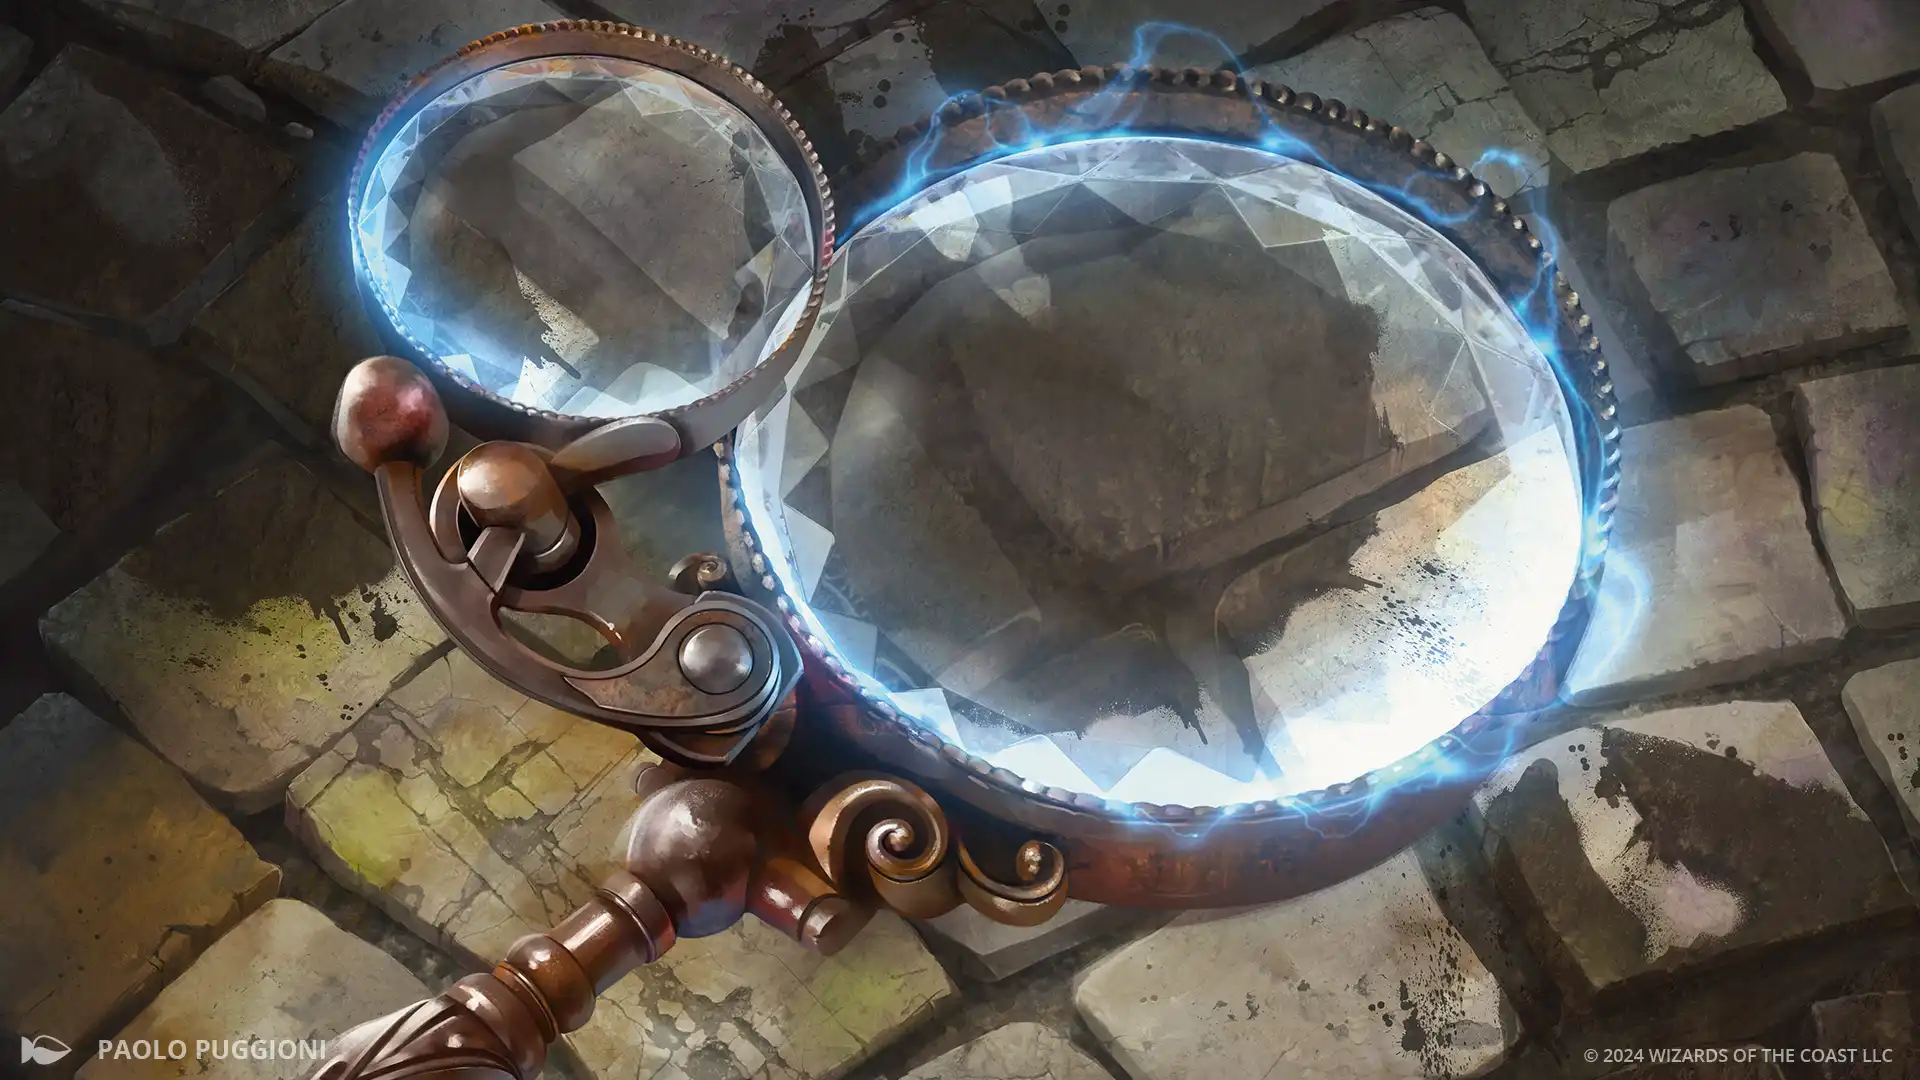 A fantastical copper magnifying glass with two lenses that are limned with blue magical energy